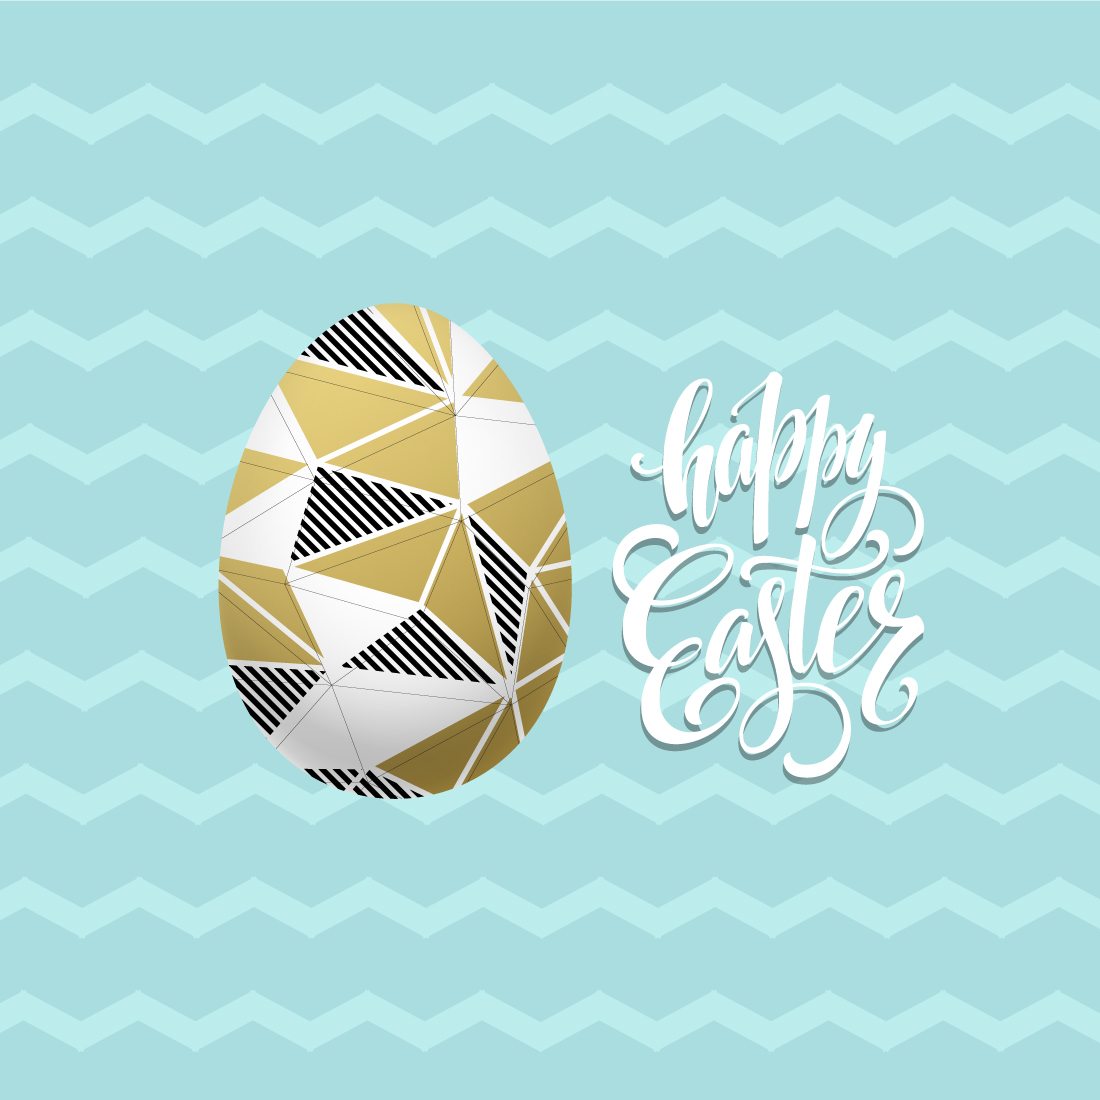 Happy easter card with an egg on a blue background.